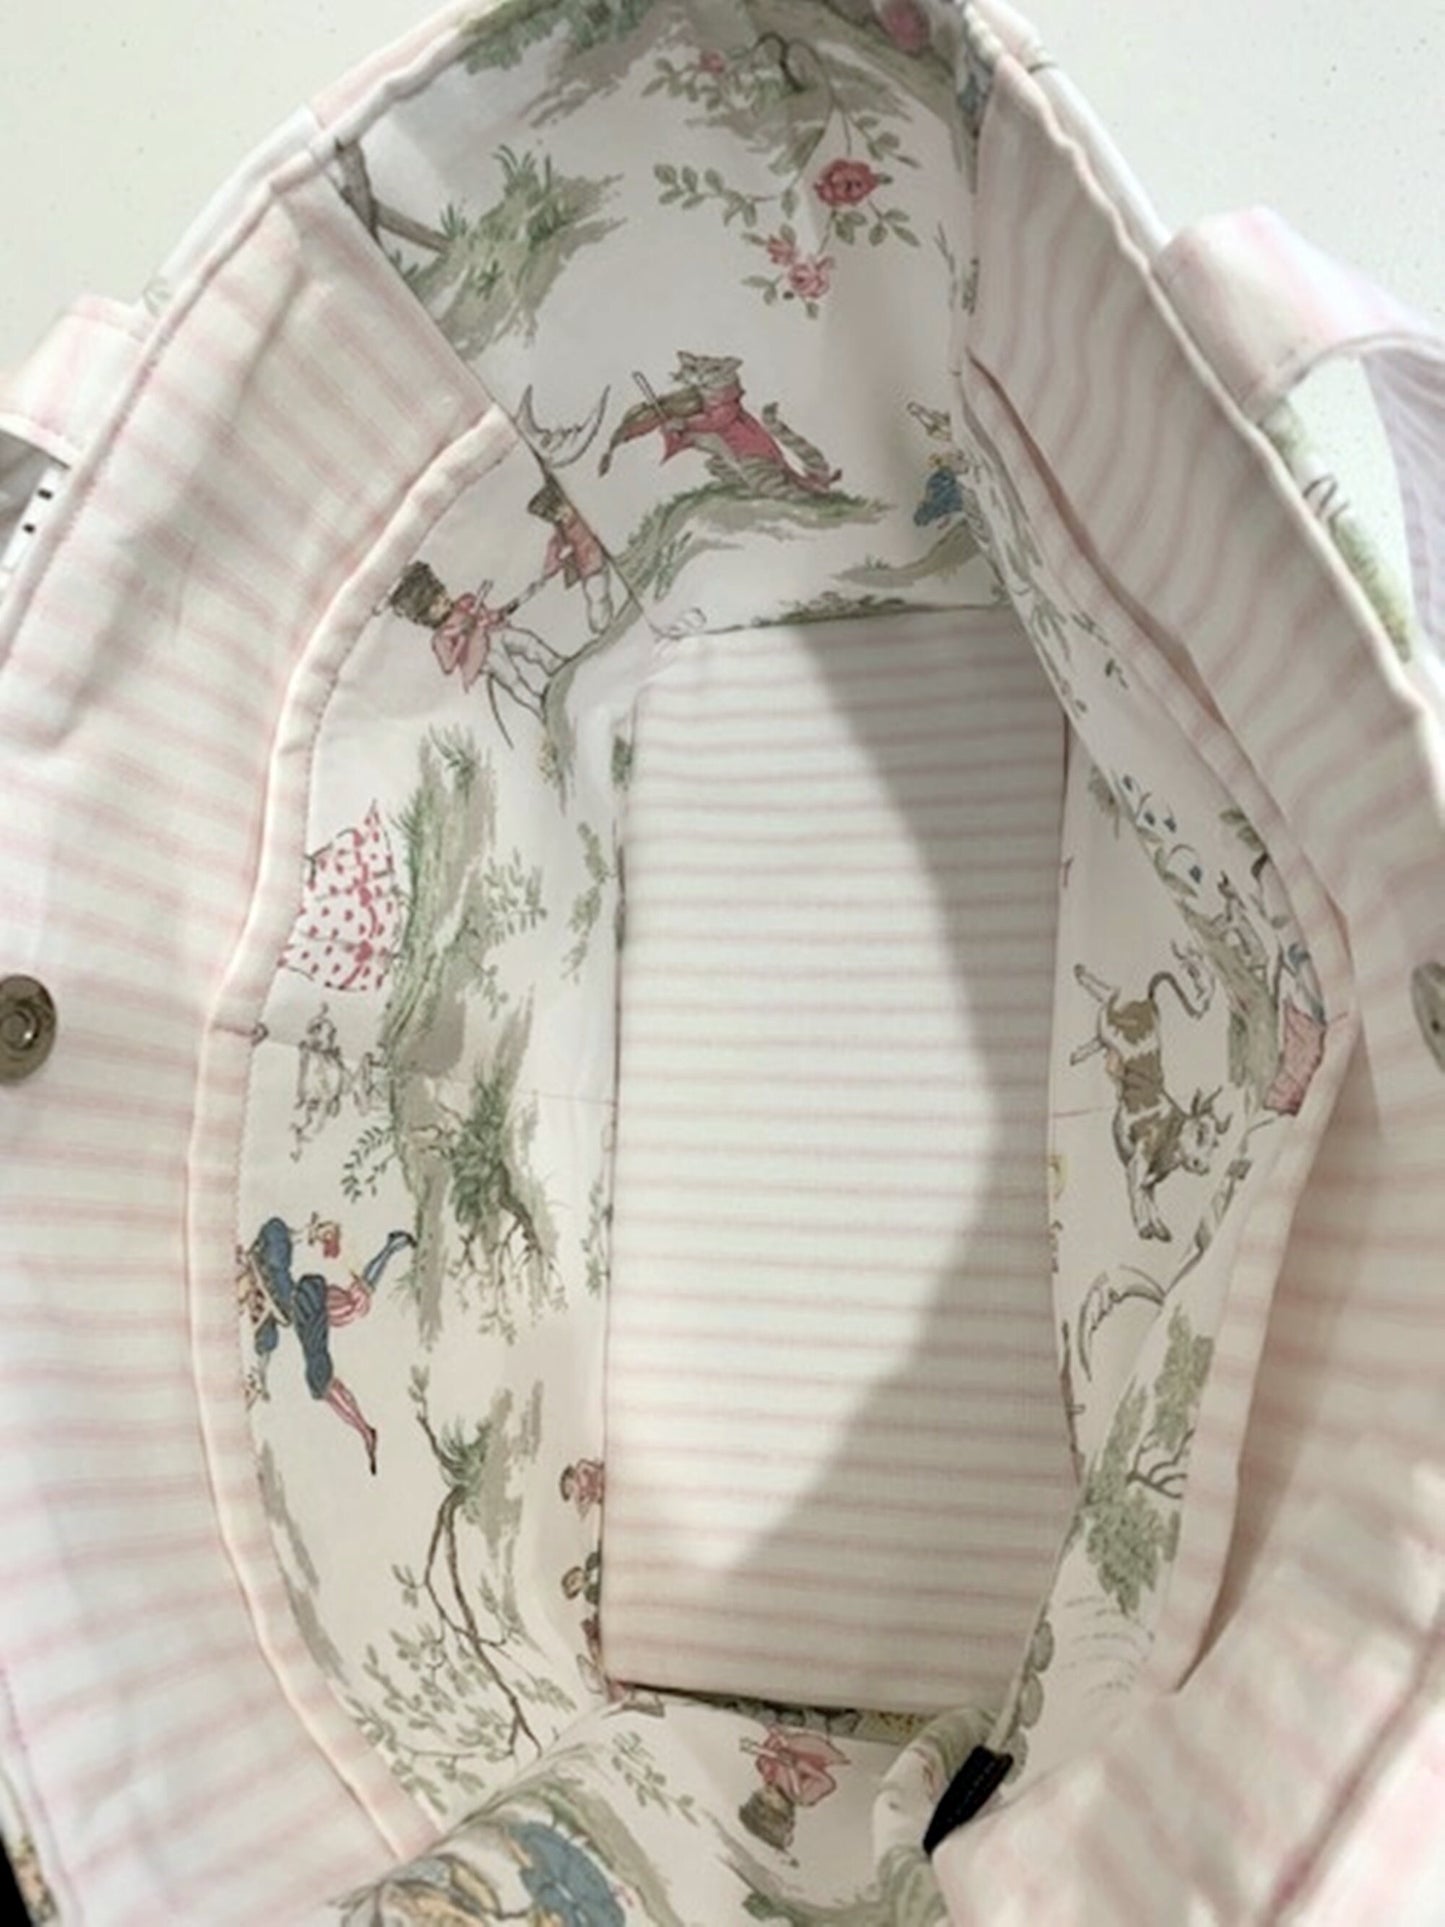 Over the Moon Nursery Rhyme Toile | Diaper Bag Tote | Large Diaperbag Boxy Style